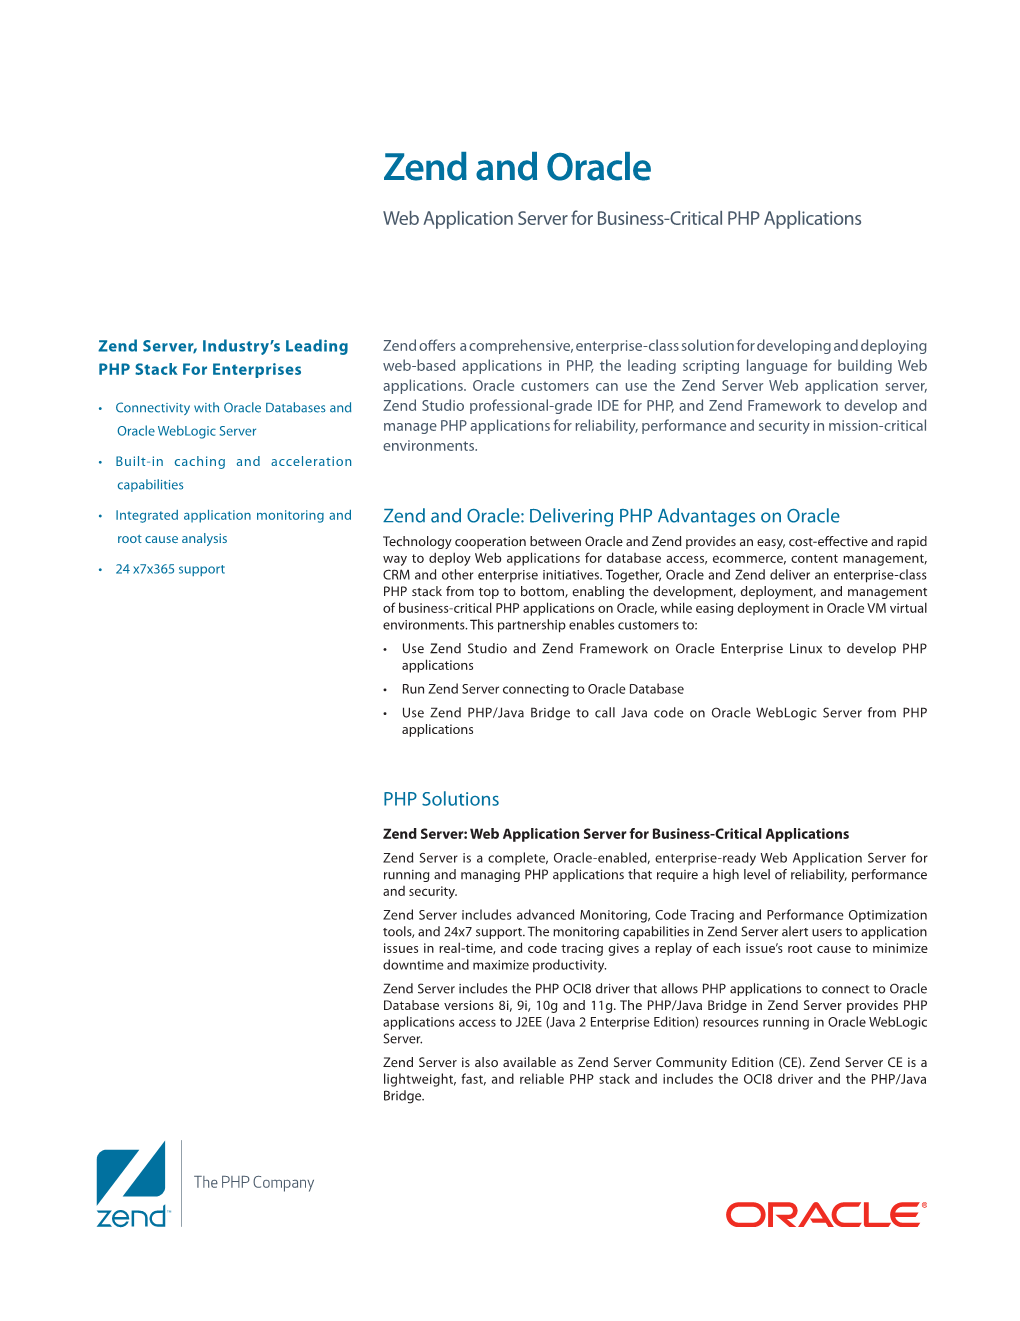 Zend and Oracle Web Application Server for Business-Critical PHP Applications